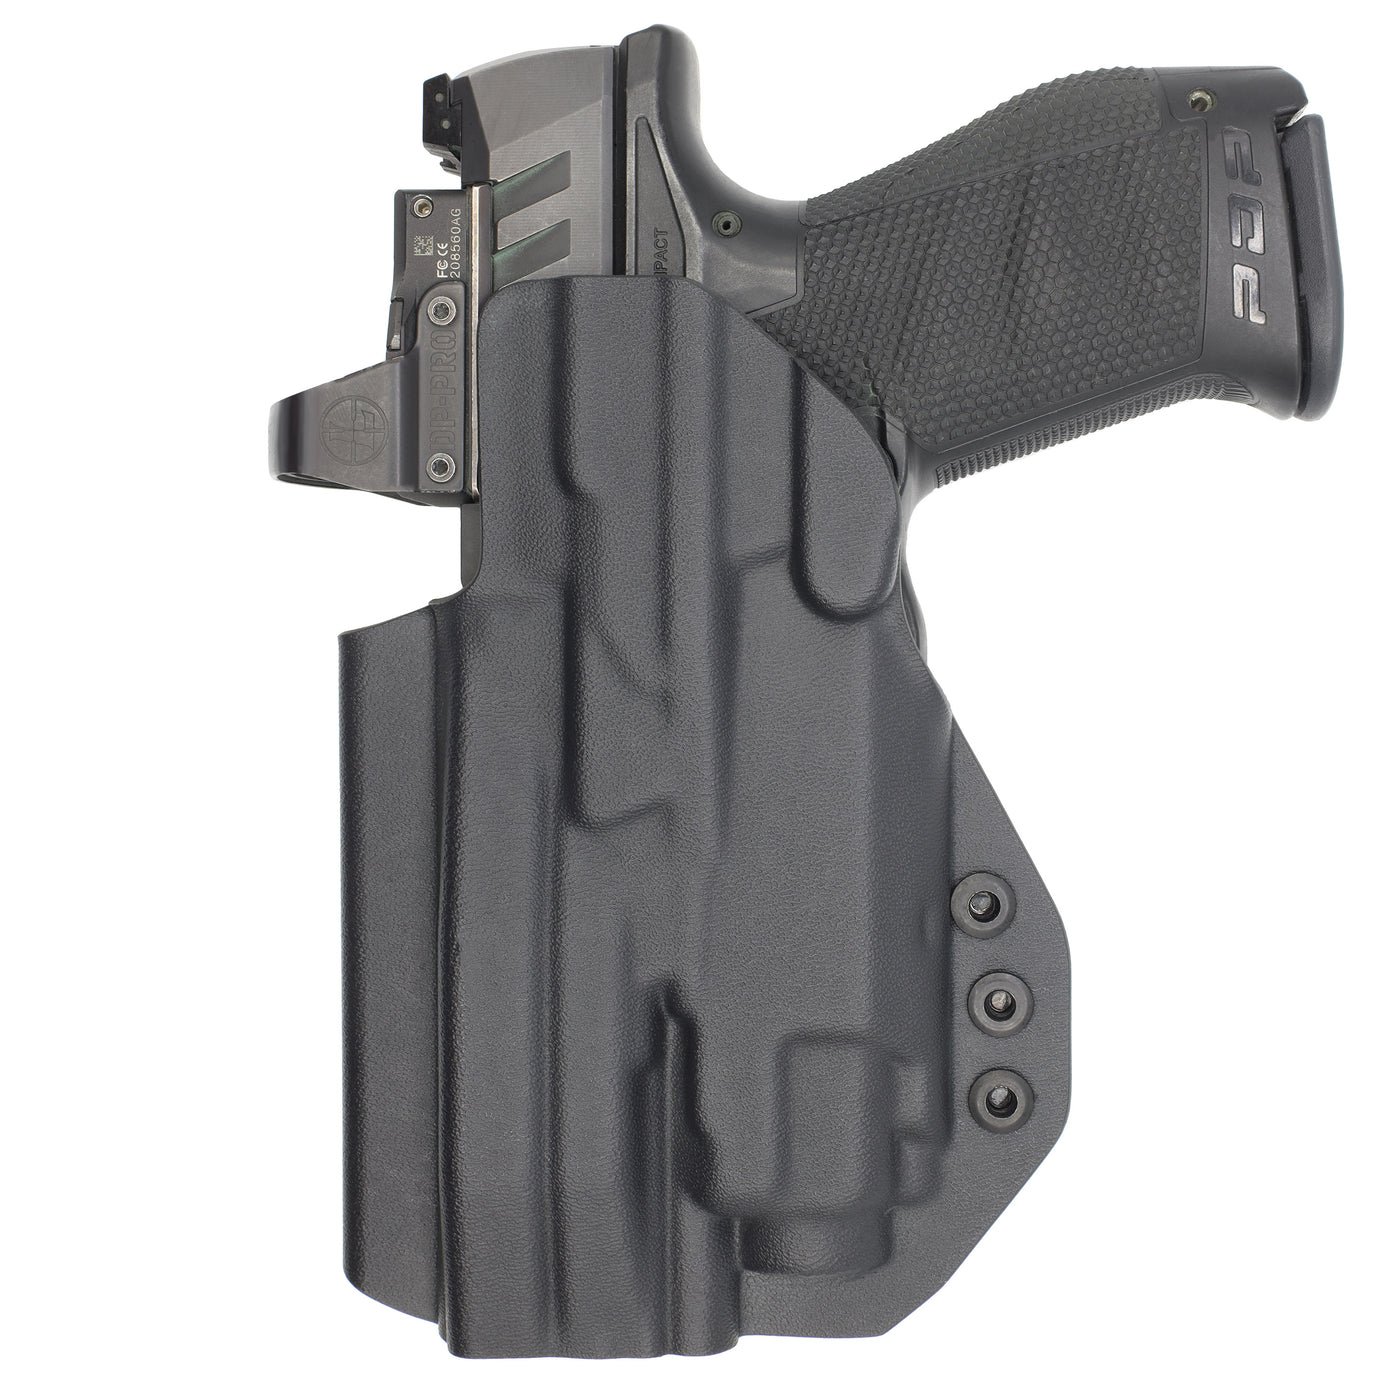 C&G Holsters quickship IWB Tactical FN 509 streamlight TLR8 holstered back view